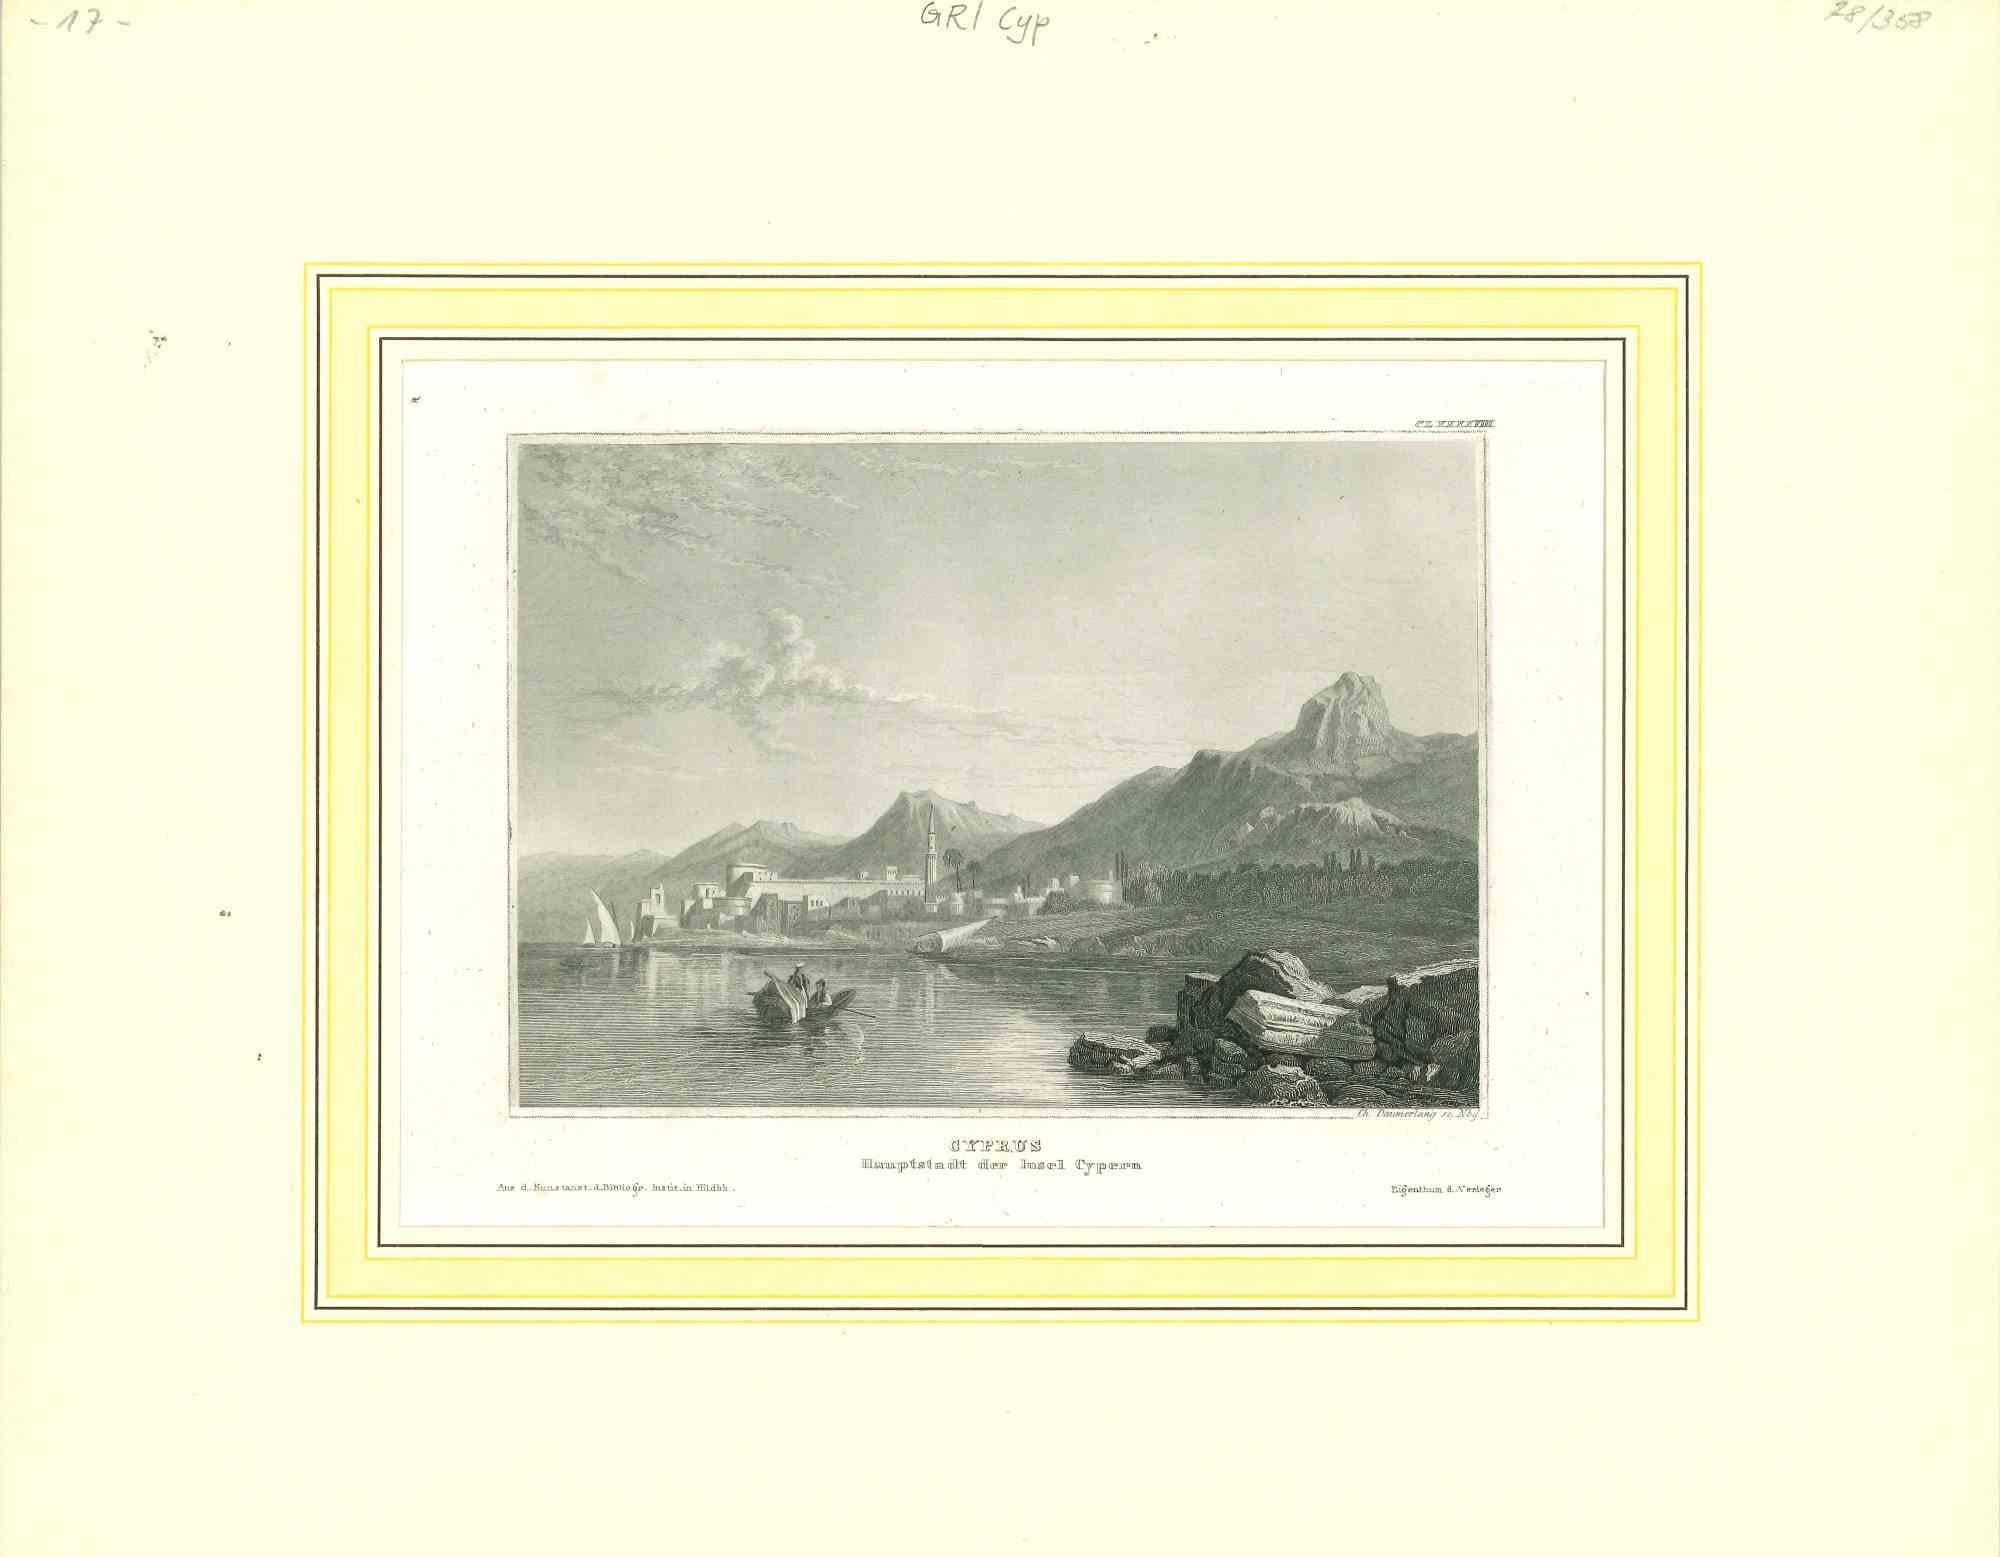 Unknown Figurative Print - Ancient View of Cyprus - Original Lithograph - Mid-19th Century